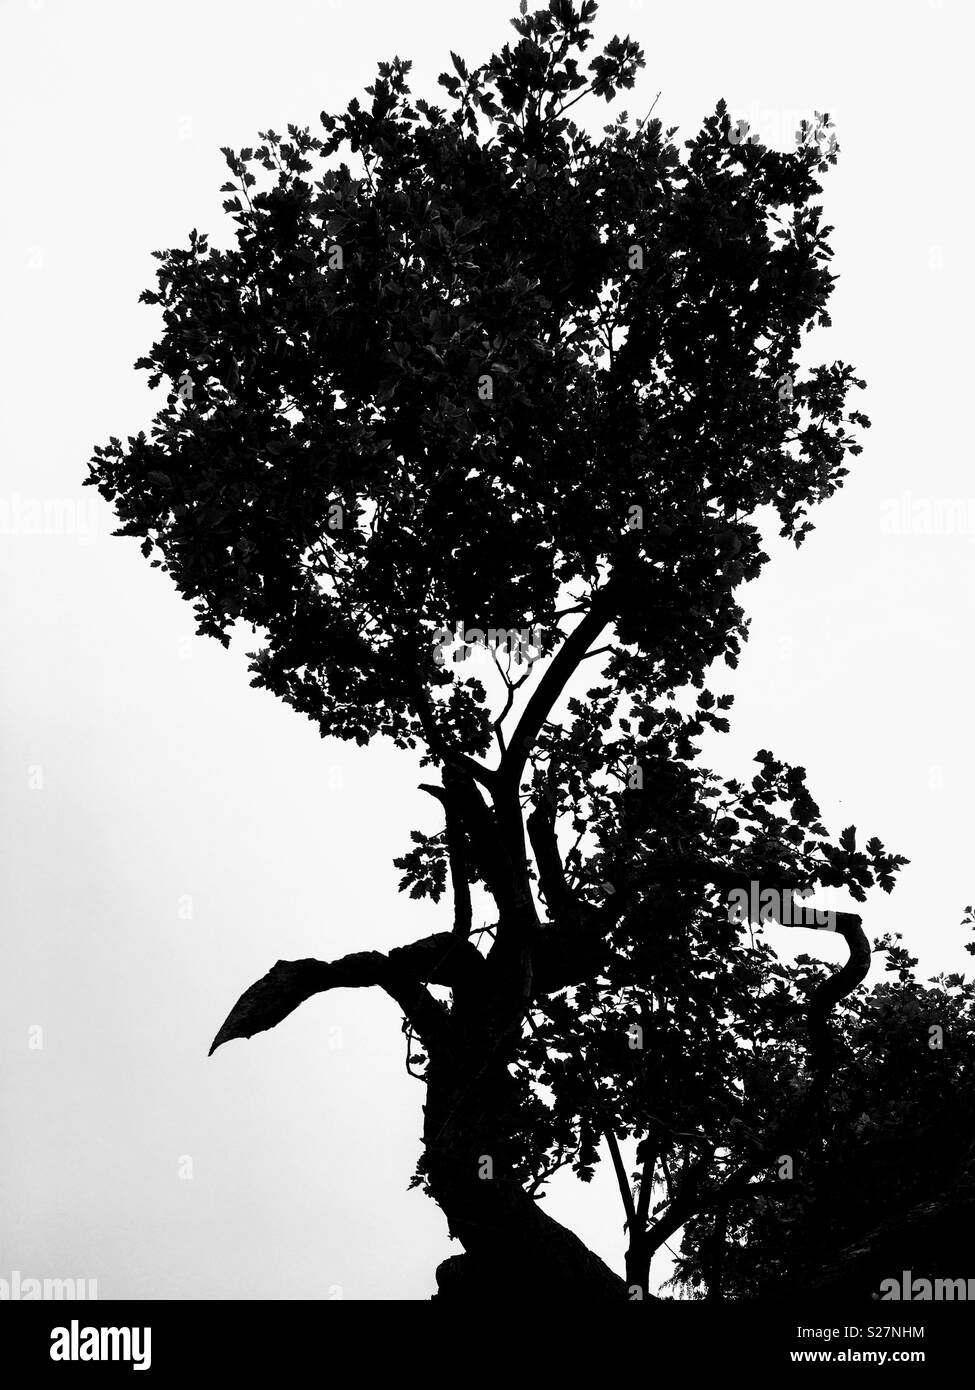 A High Tree in Black & White Stock Photo